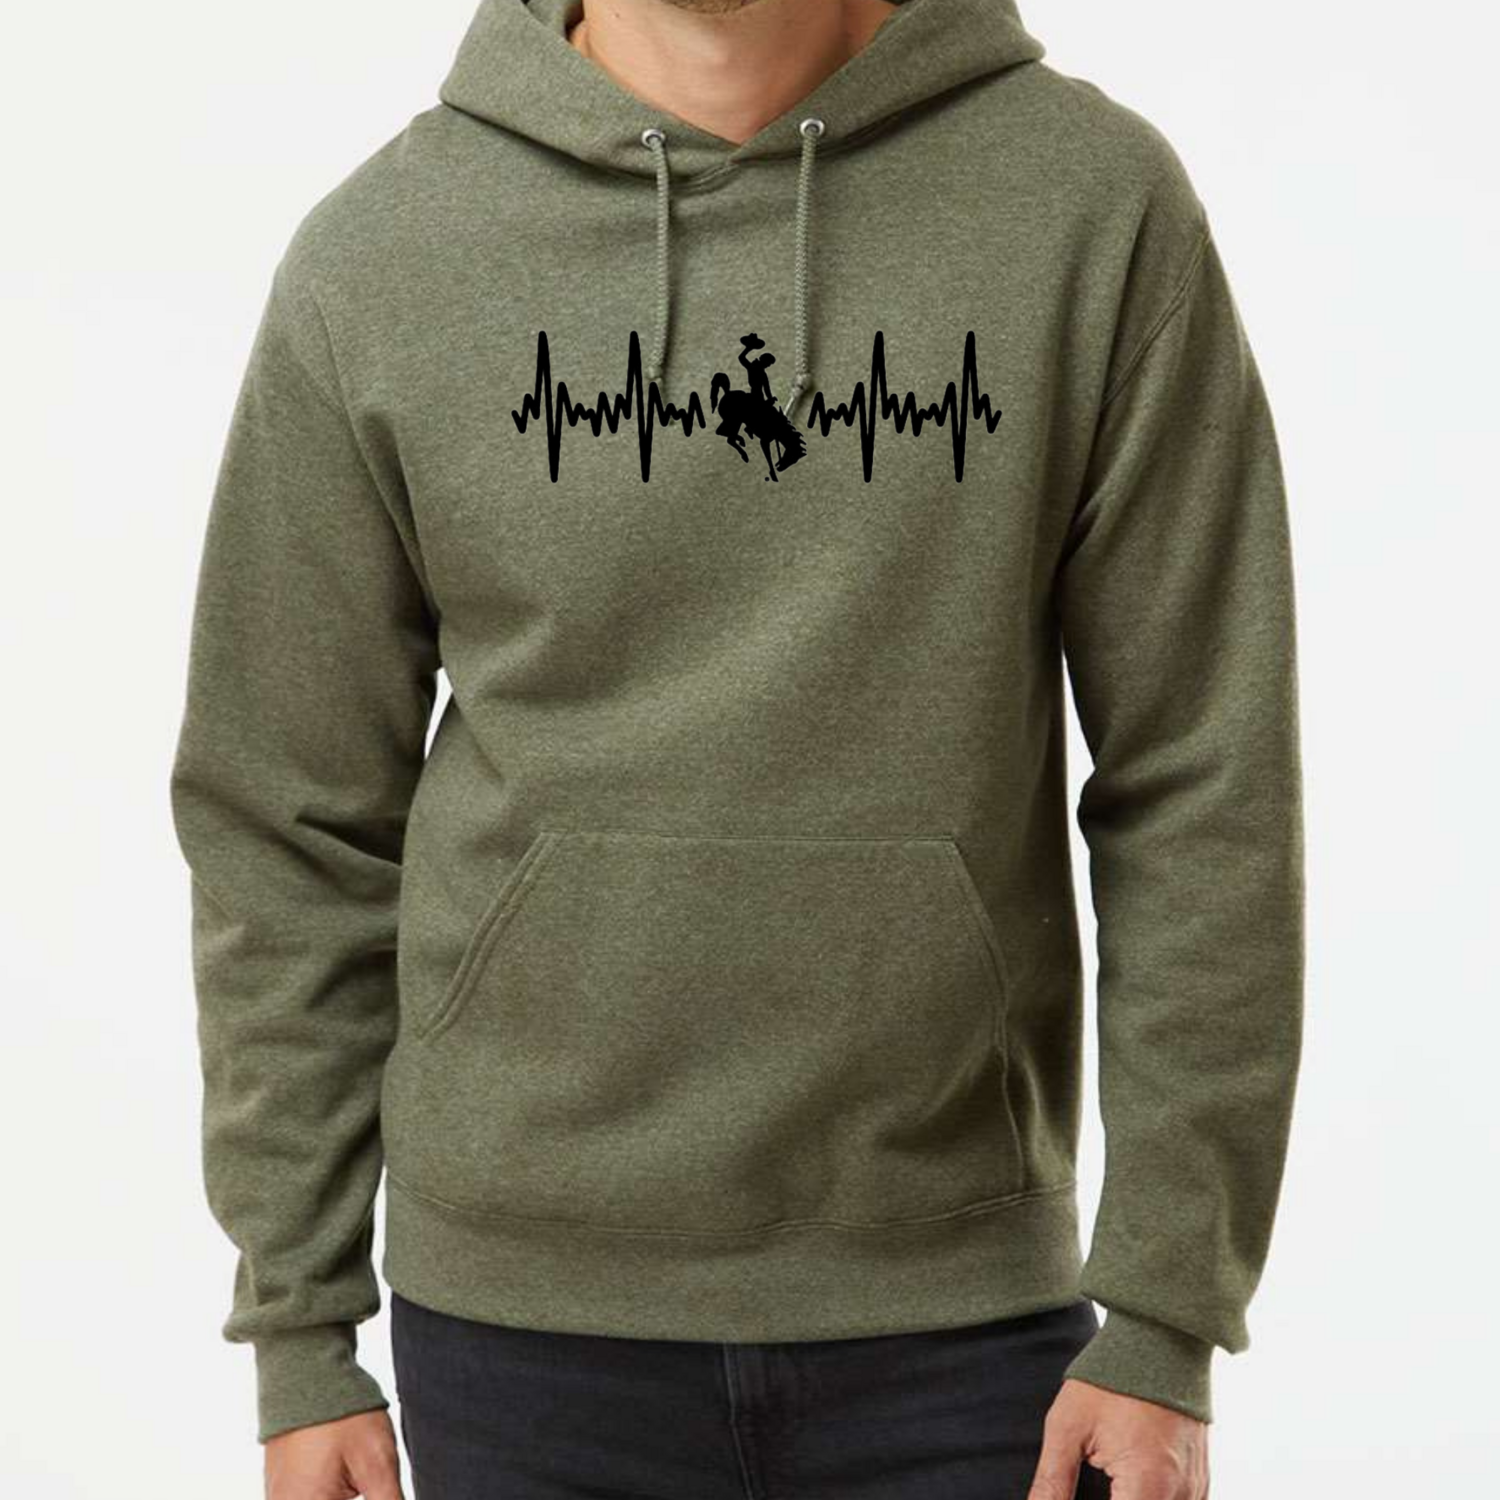 The Heartbeat of the Wyoming Cowboys Hoodie